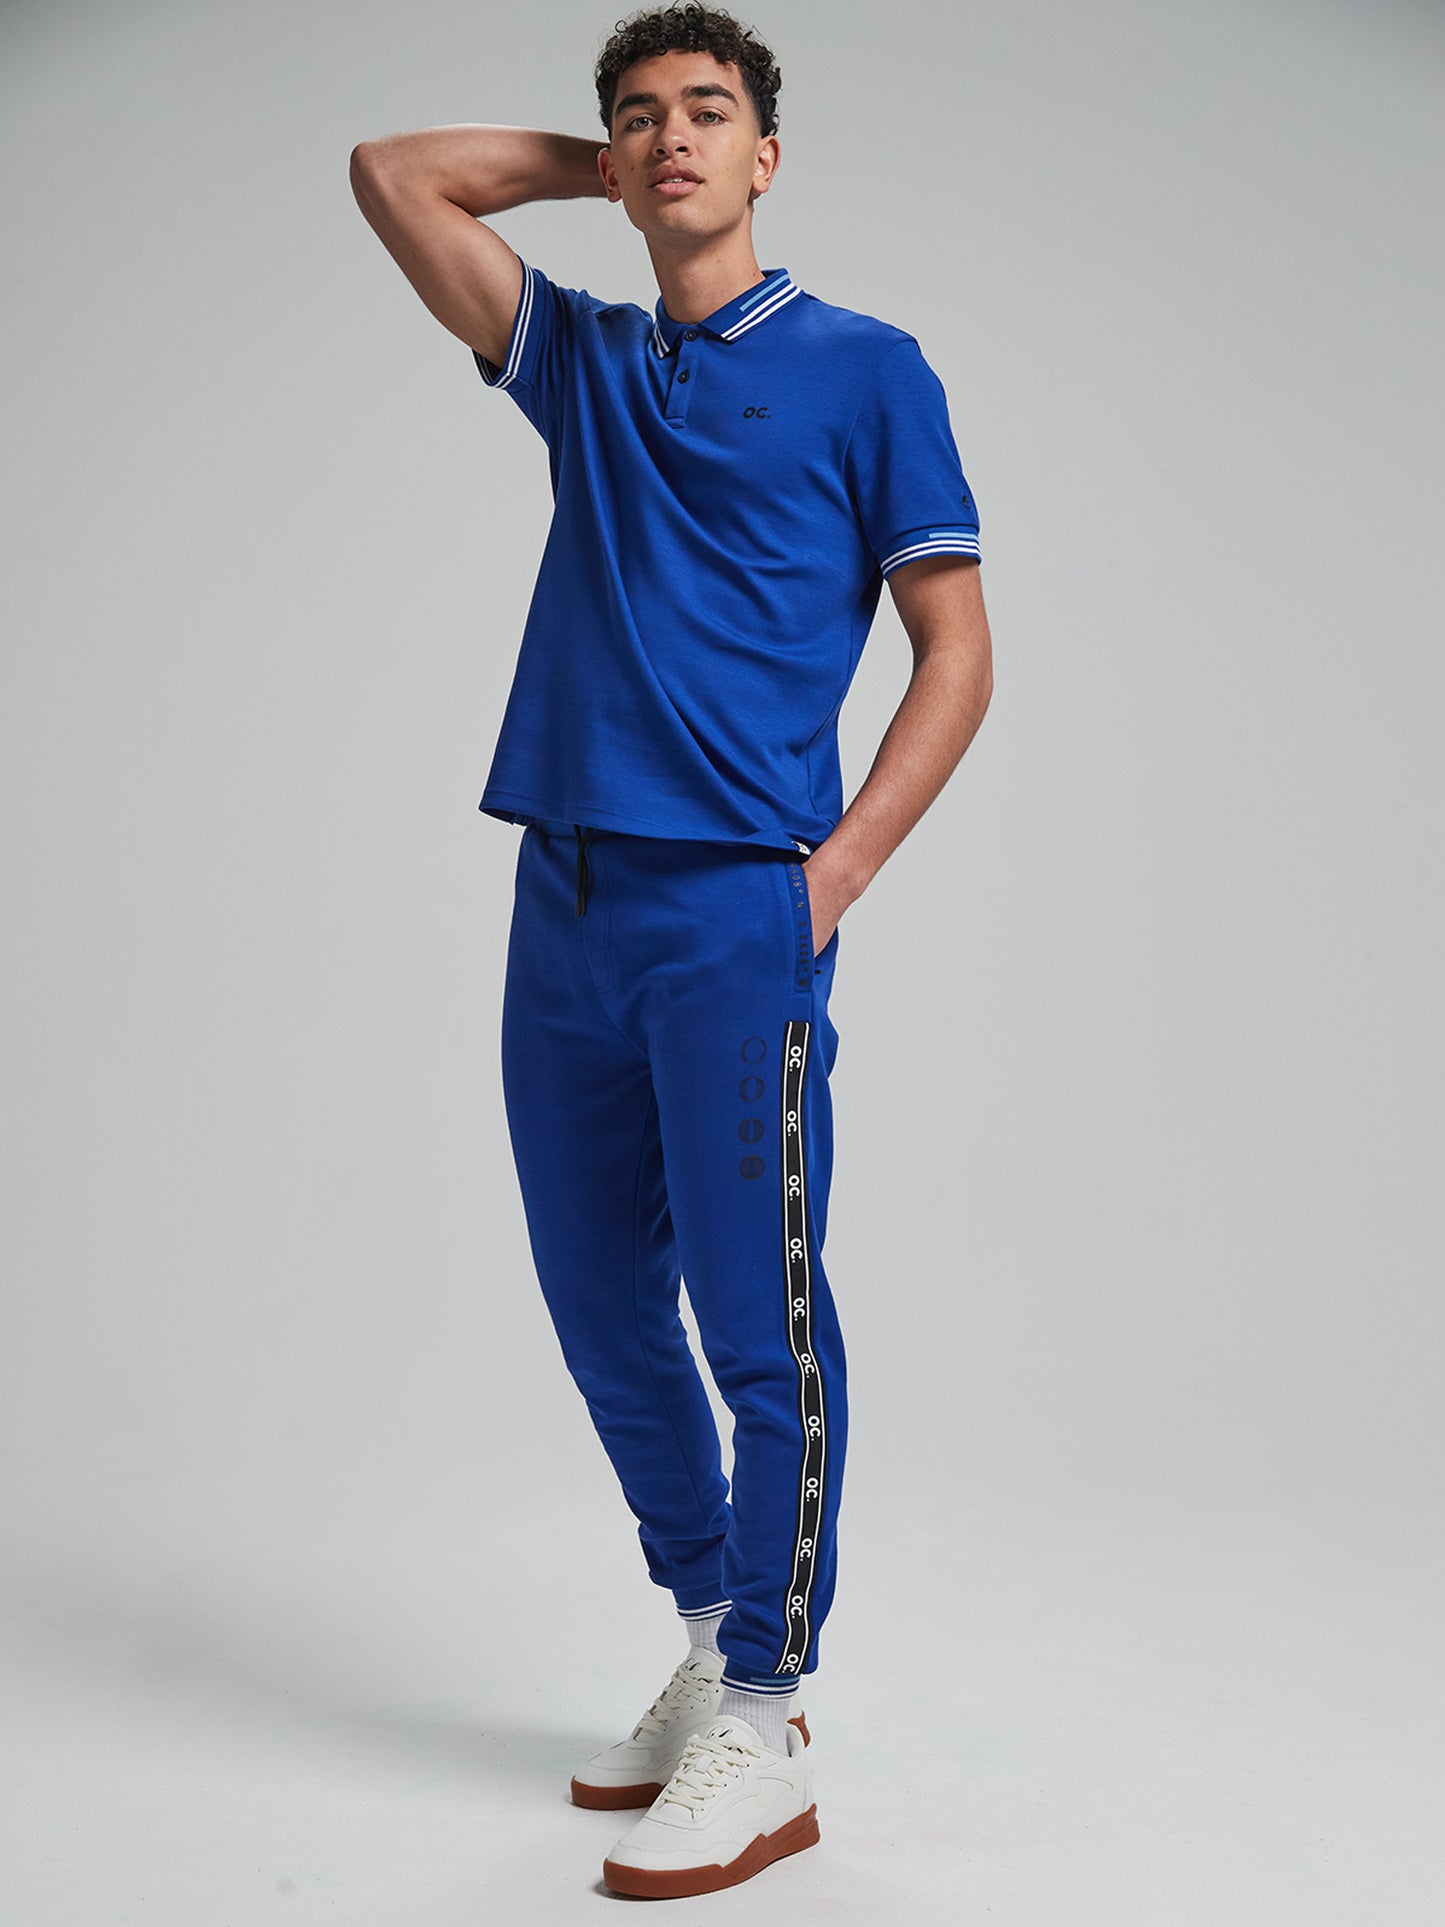 Track Polo Shirt - Olympic Blue